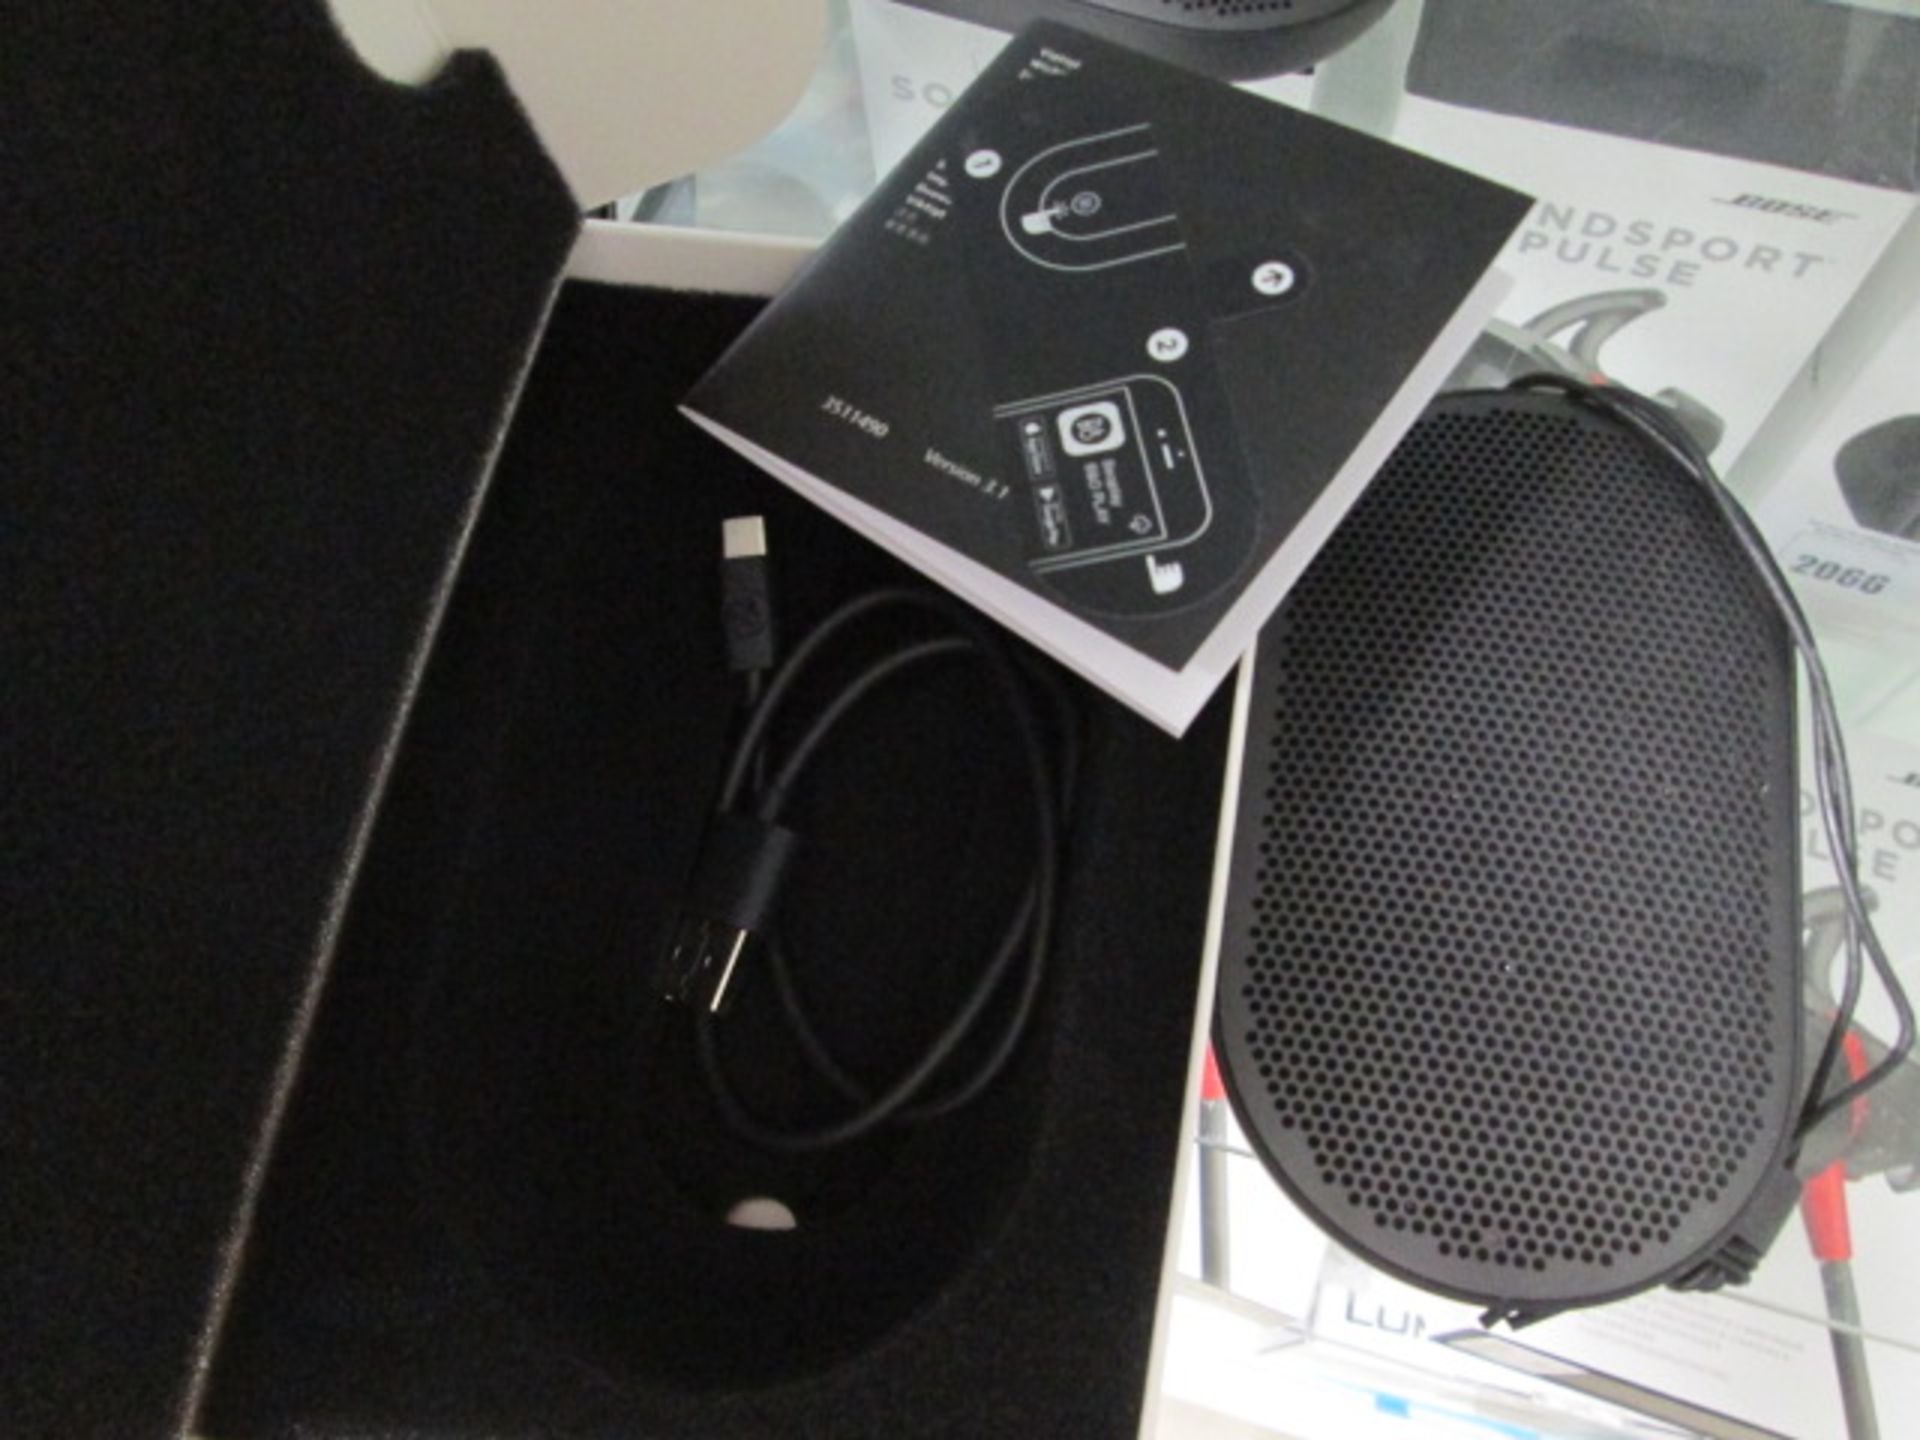 Bang & Olufsen P2 portable bluetooth speaker with box - Image 2 of 3